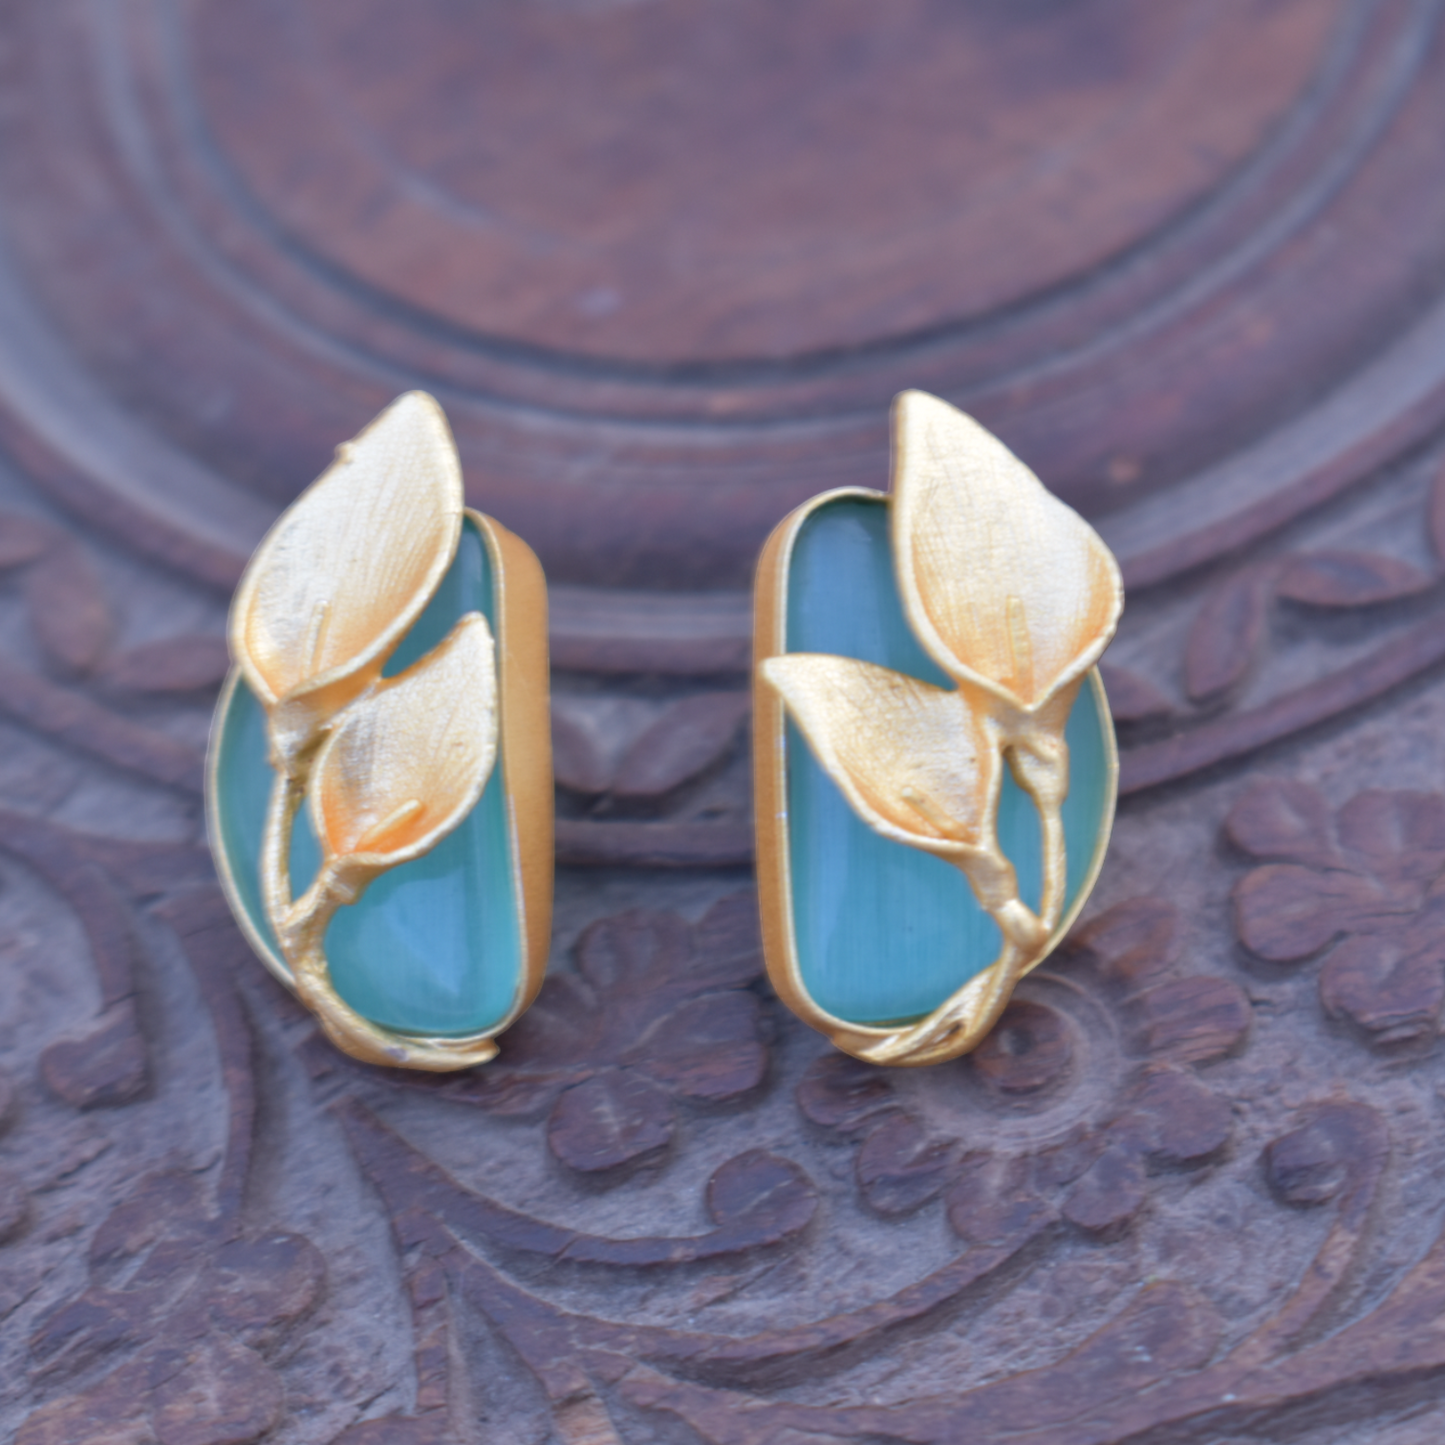 A pair og goldplated stone earing